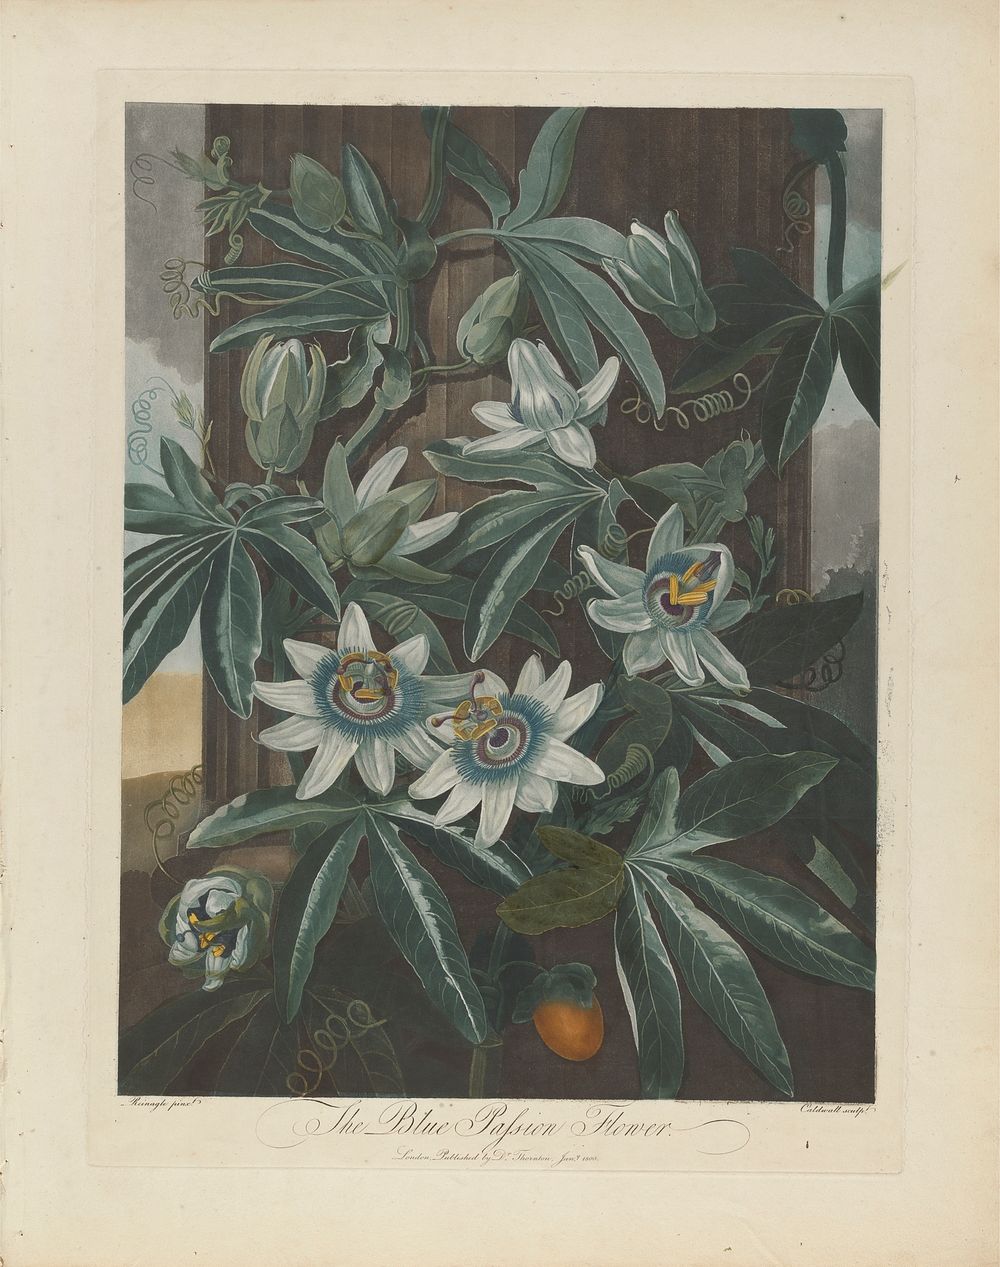 The Blue Passion Flower, 1800, from Robert John Thornton, 'The Temple of Flora', London, 1799-1812